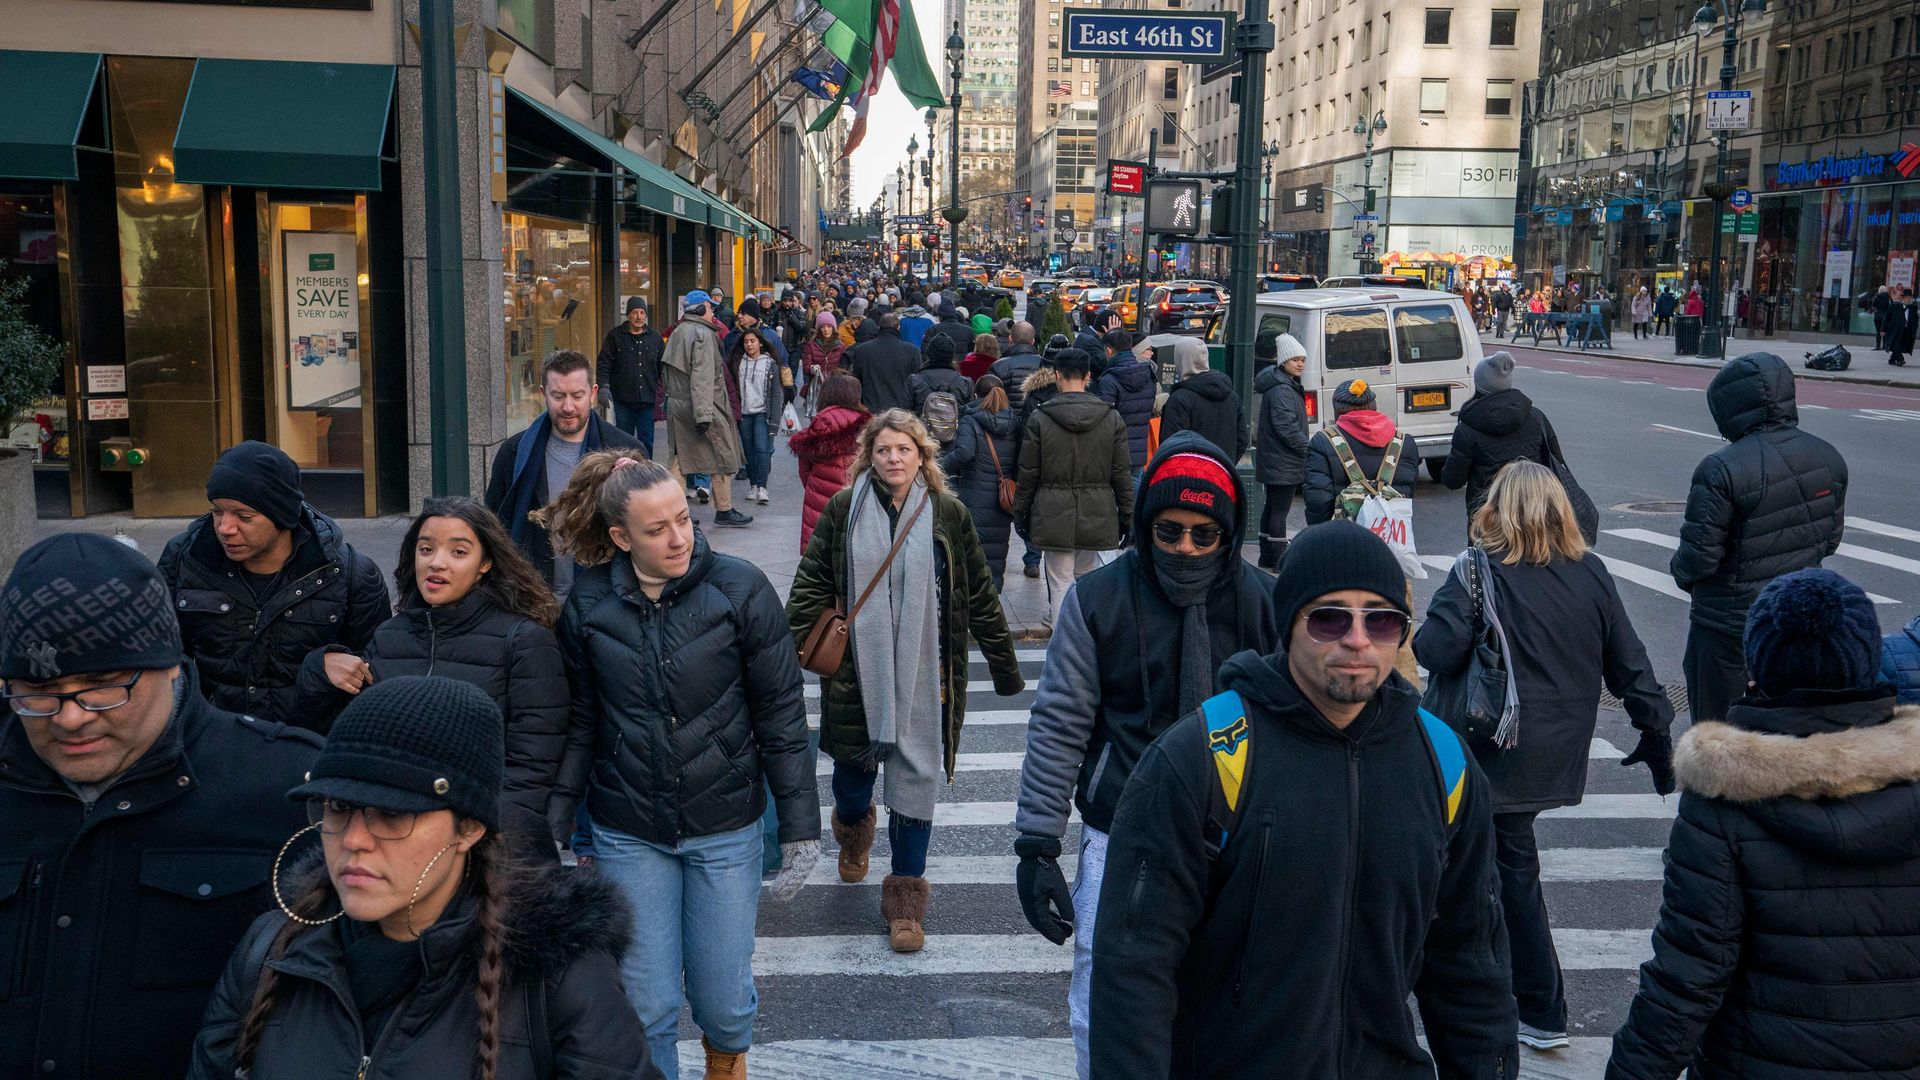 Image of pedestrians on Black Friday shopping in New York